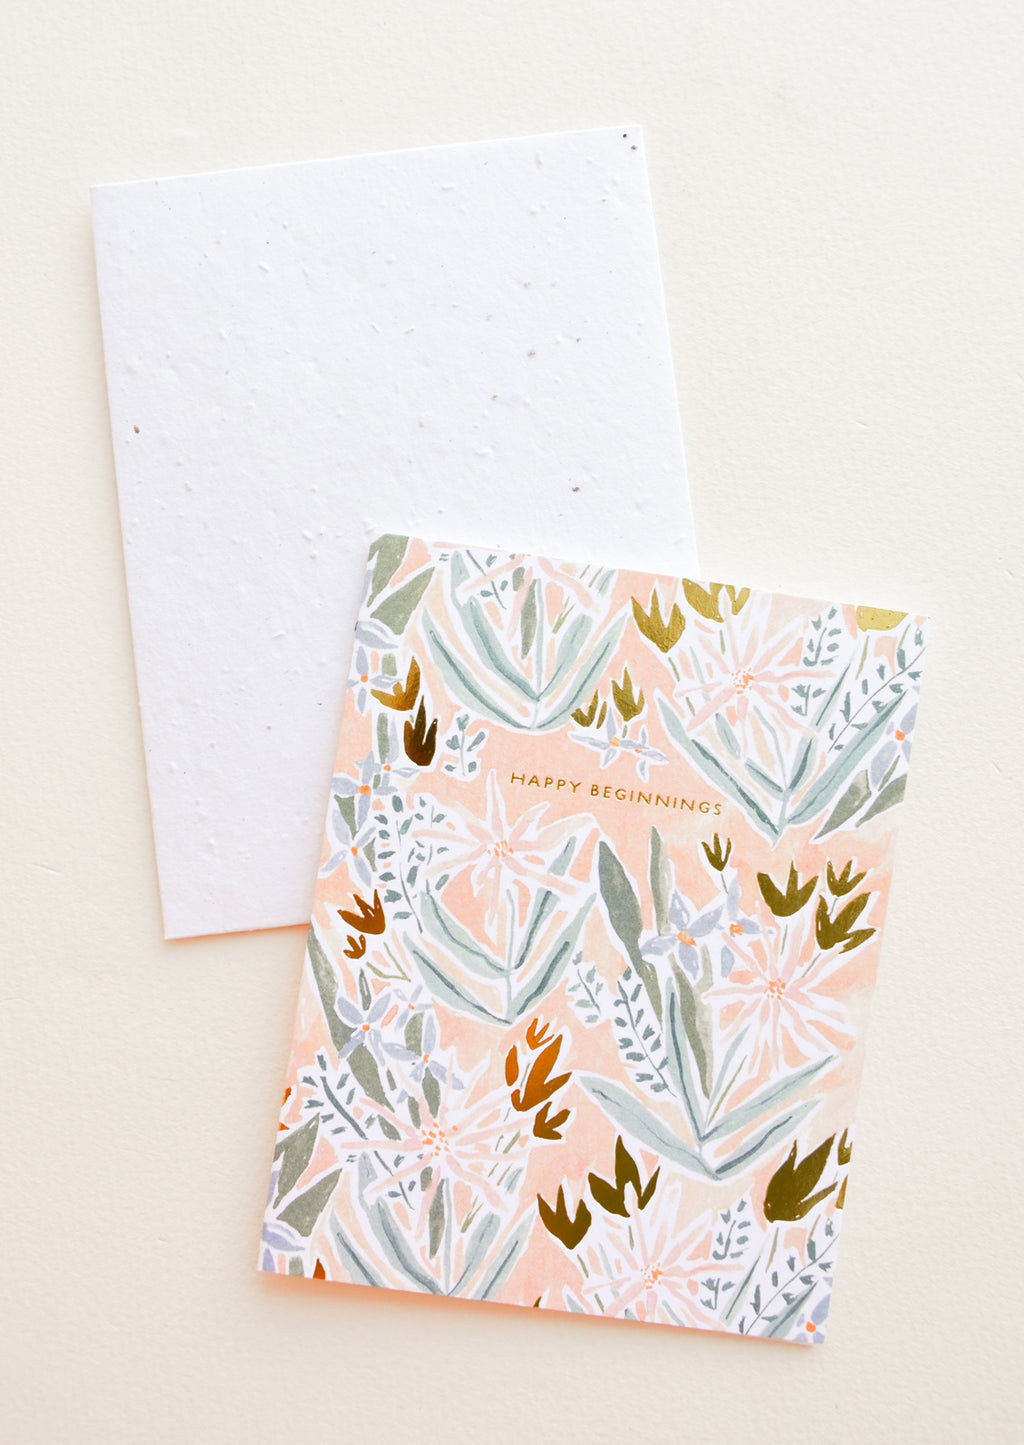 1: Greeting card in peach color with floral print and "Happy Beginnings" text